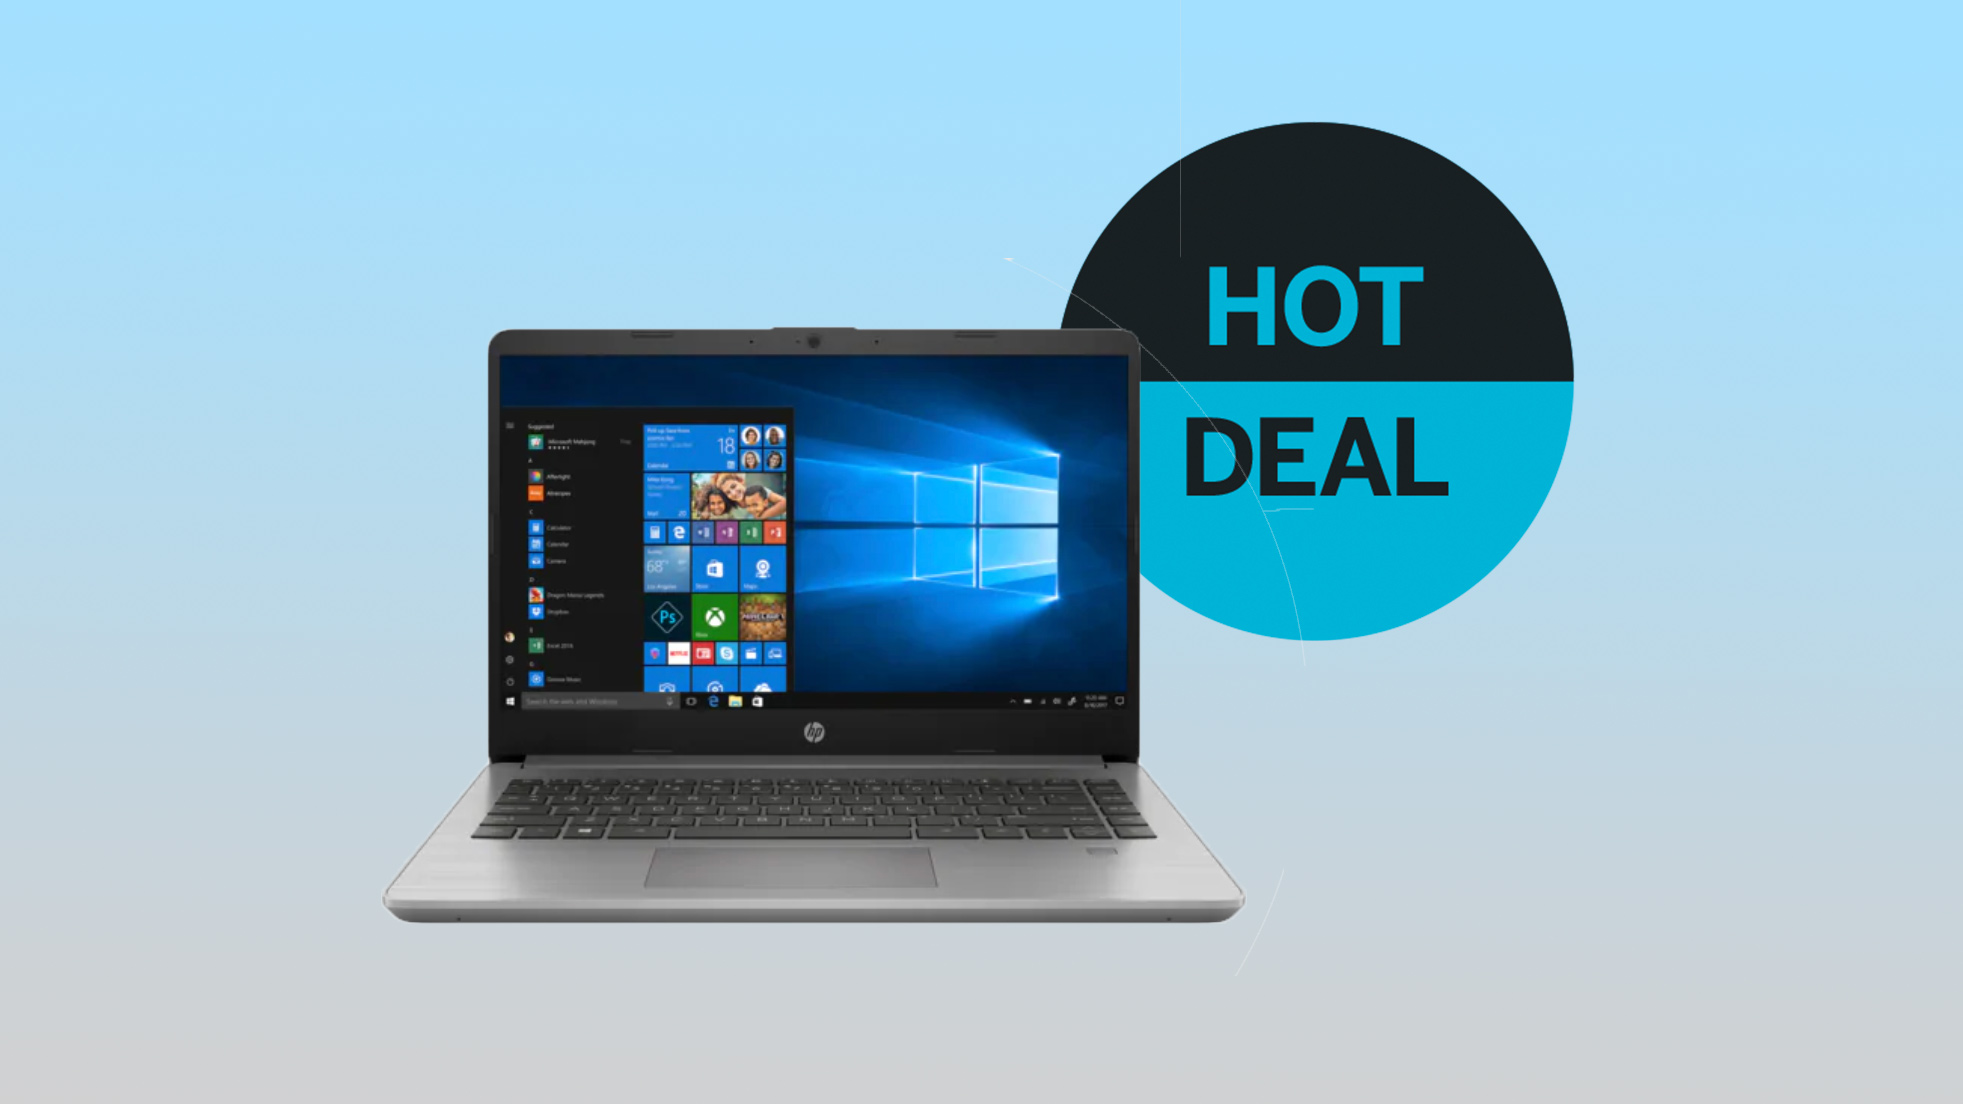 Save almost 700 on this HP laptop 4th of July deal! Digital Camera